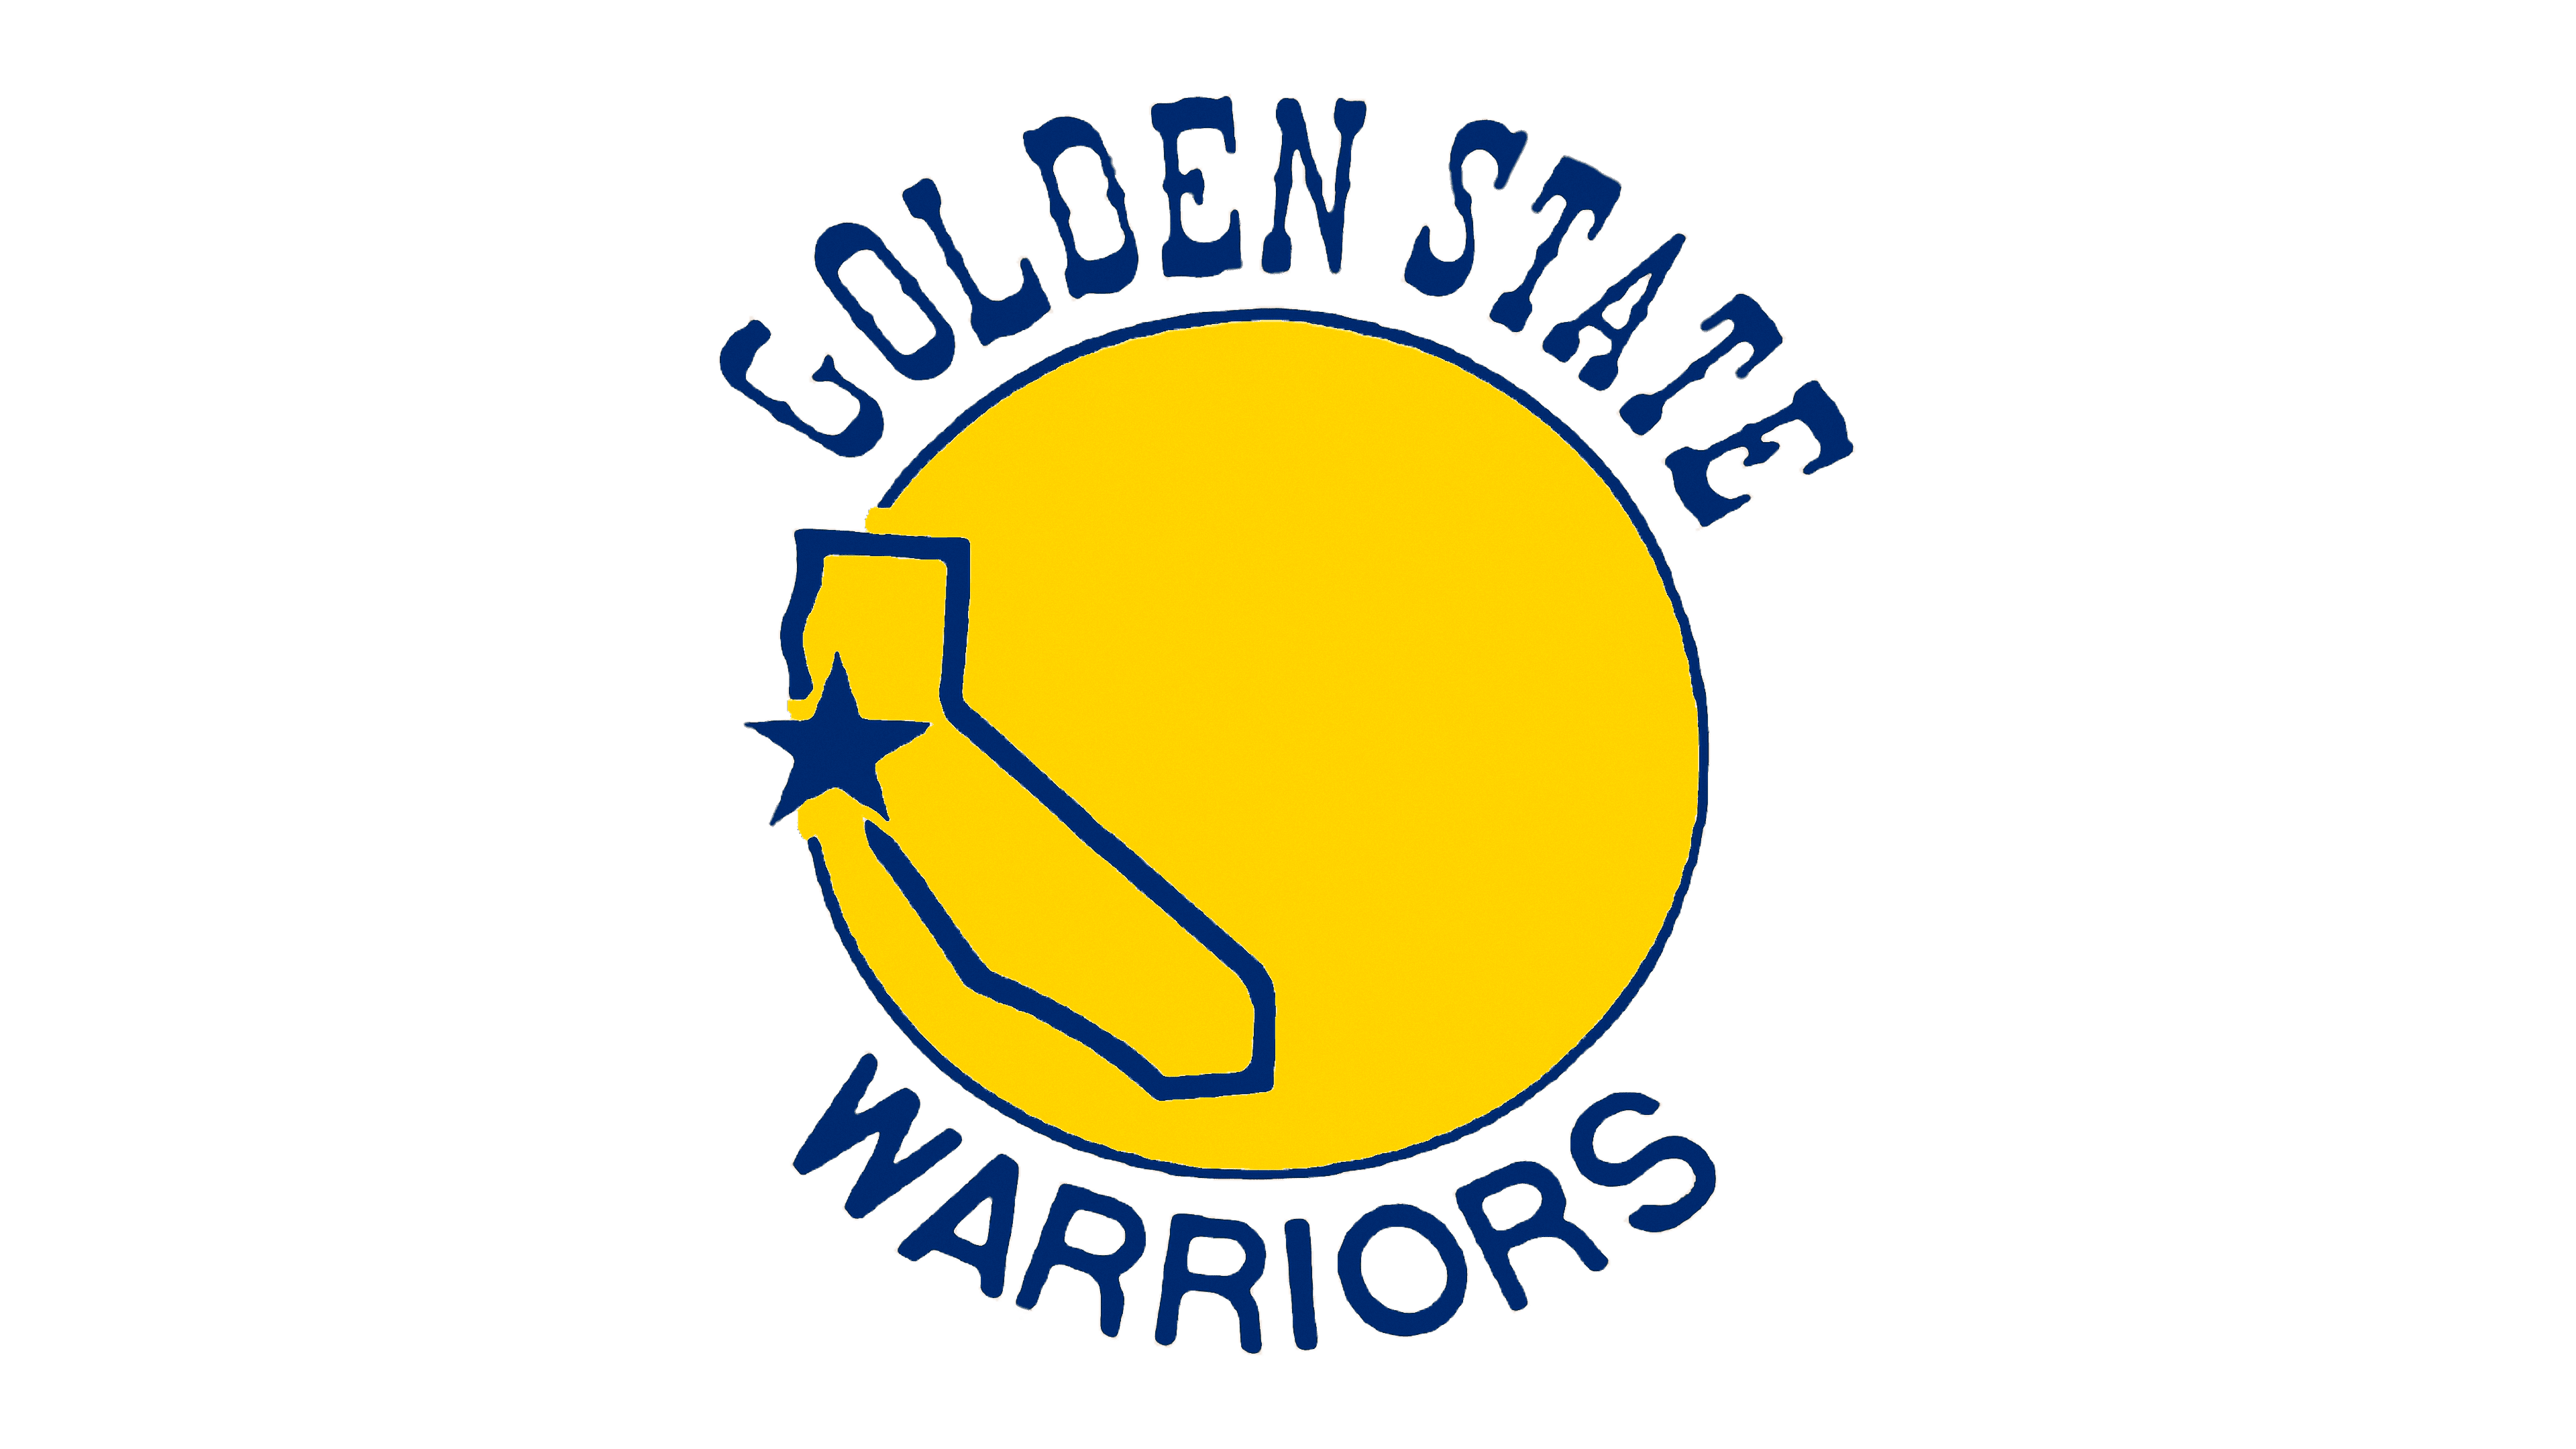 How to Draw the Golden State Warriors Logo 